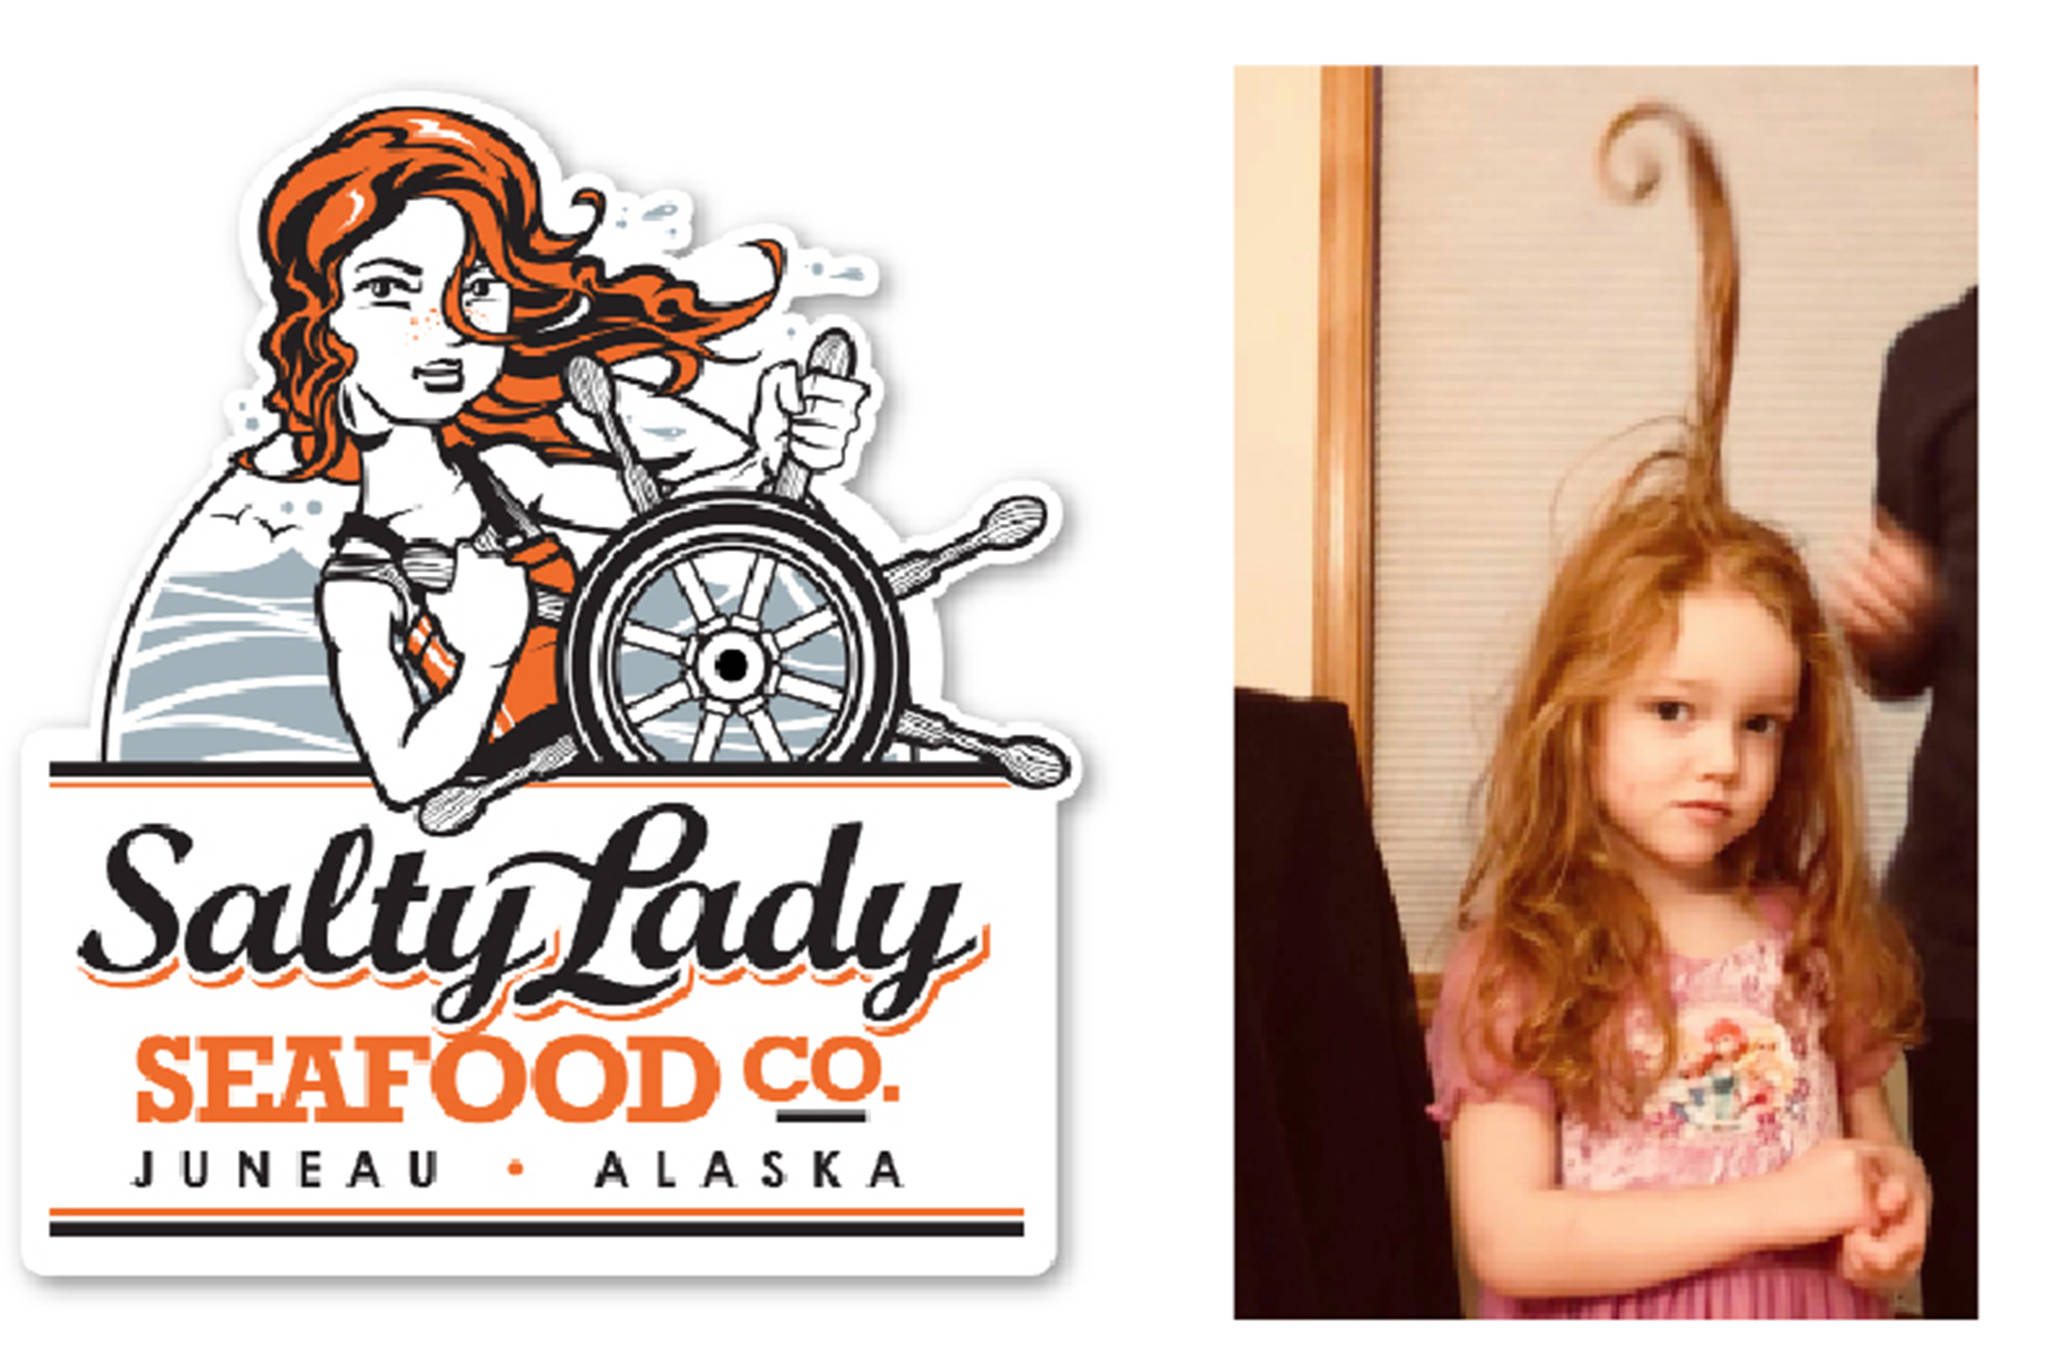 The Salty Lady Seafood Co. logo and Wren Mesdag, 4, the logo’s inspiration. (Courtesy photo)